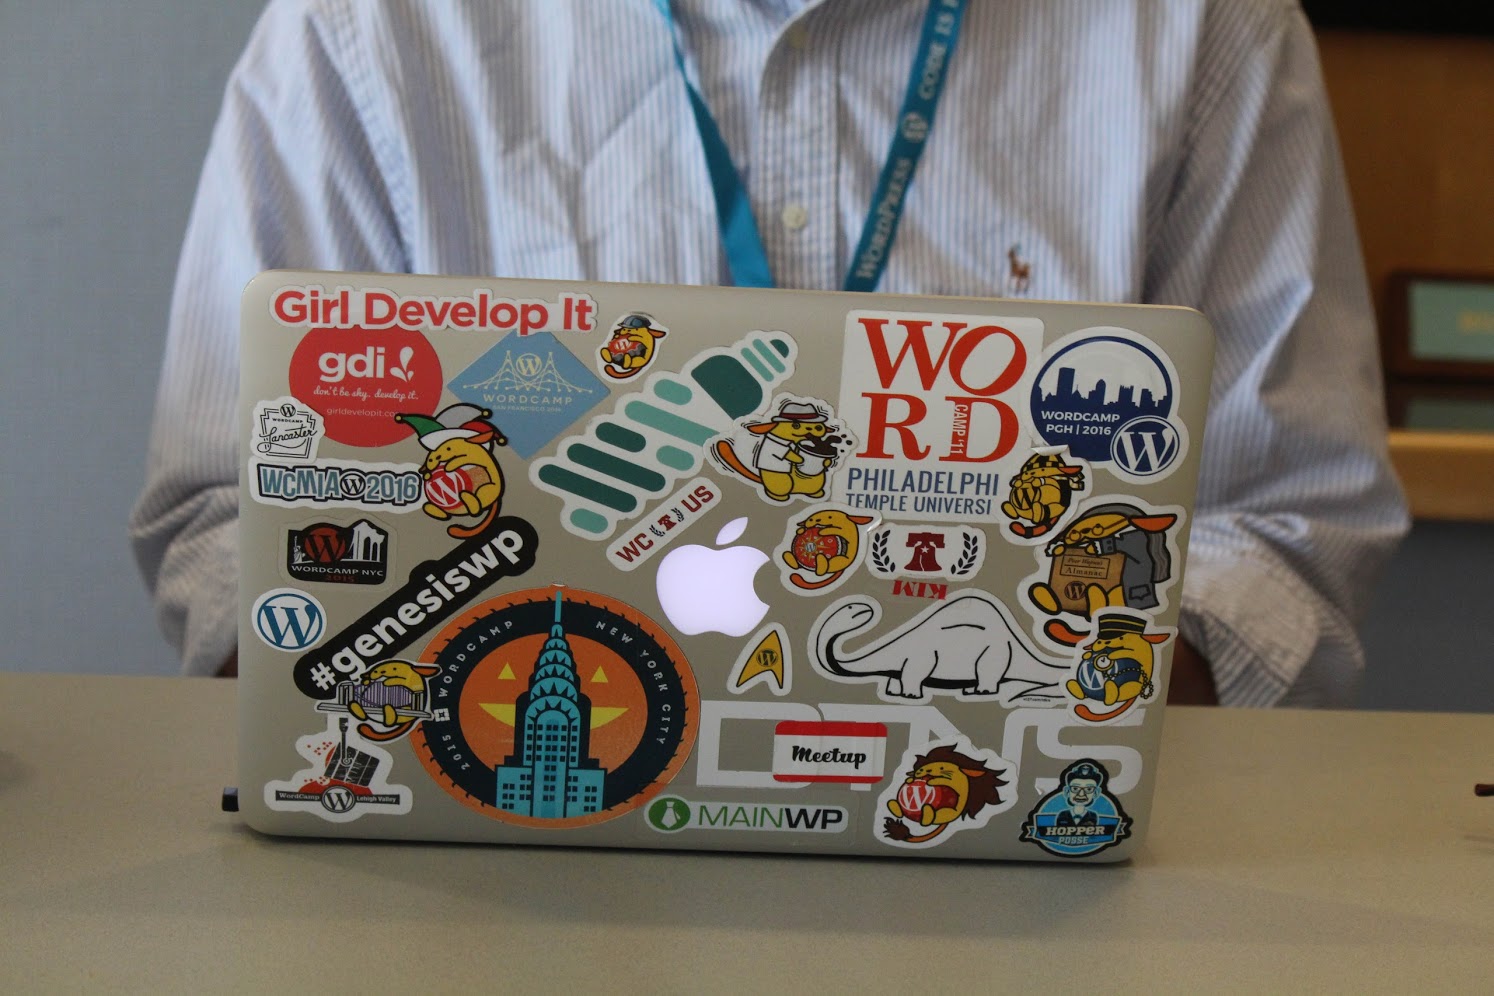 MacBook covered with WordPress, WordCamp, and sponsor stickers